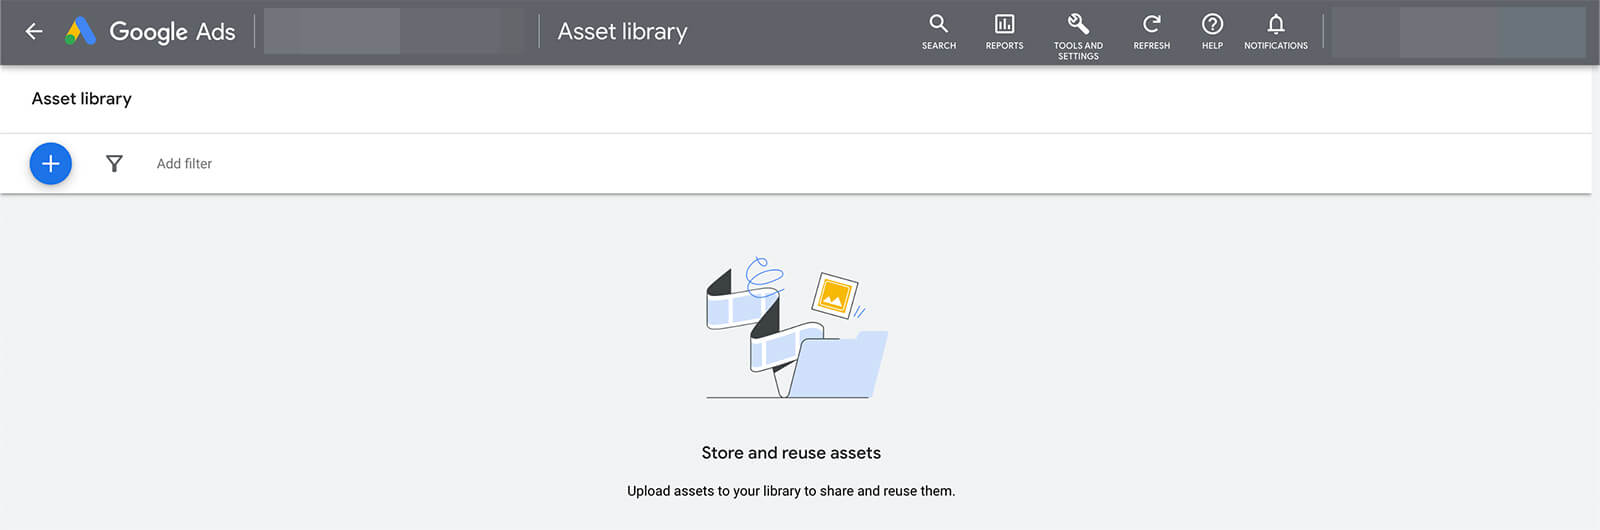 what-is-google-ads-asset-library-example-2